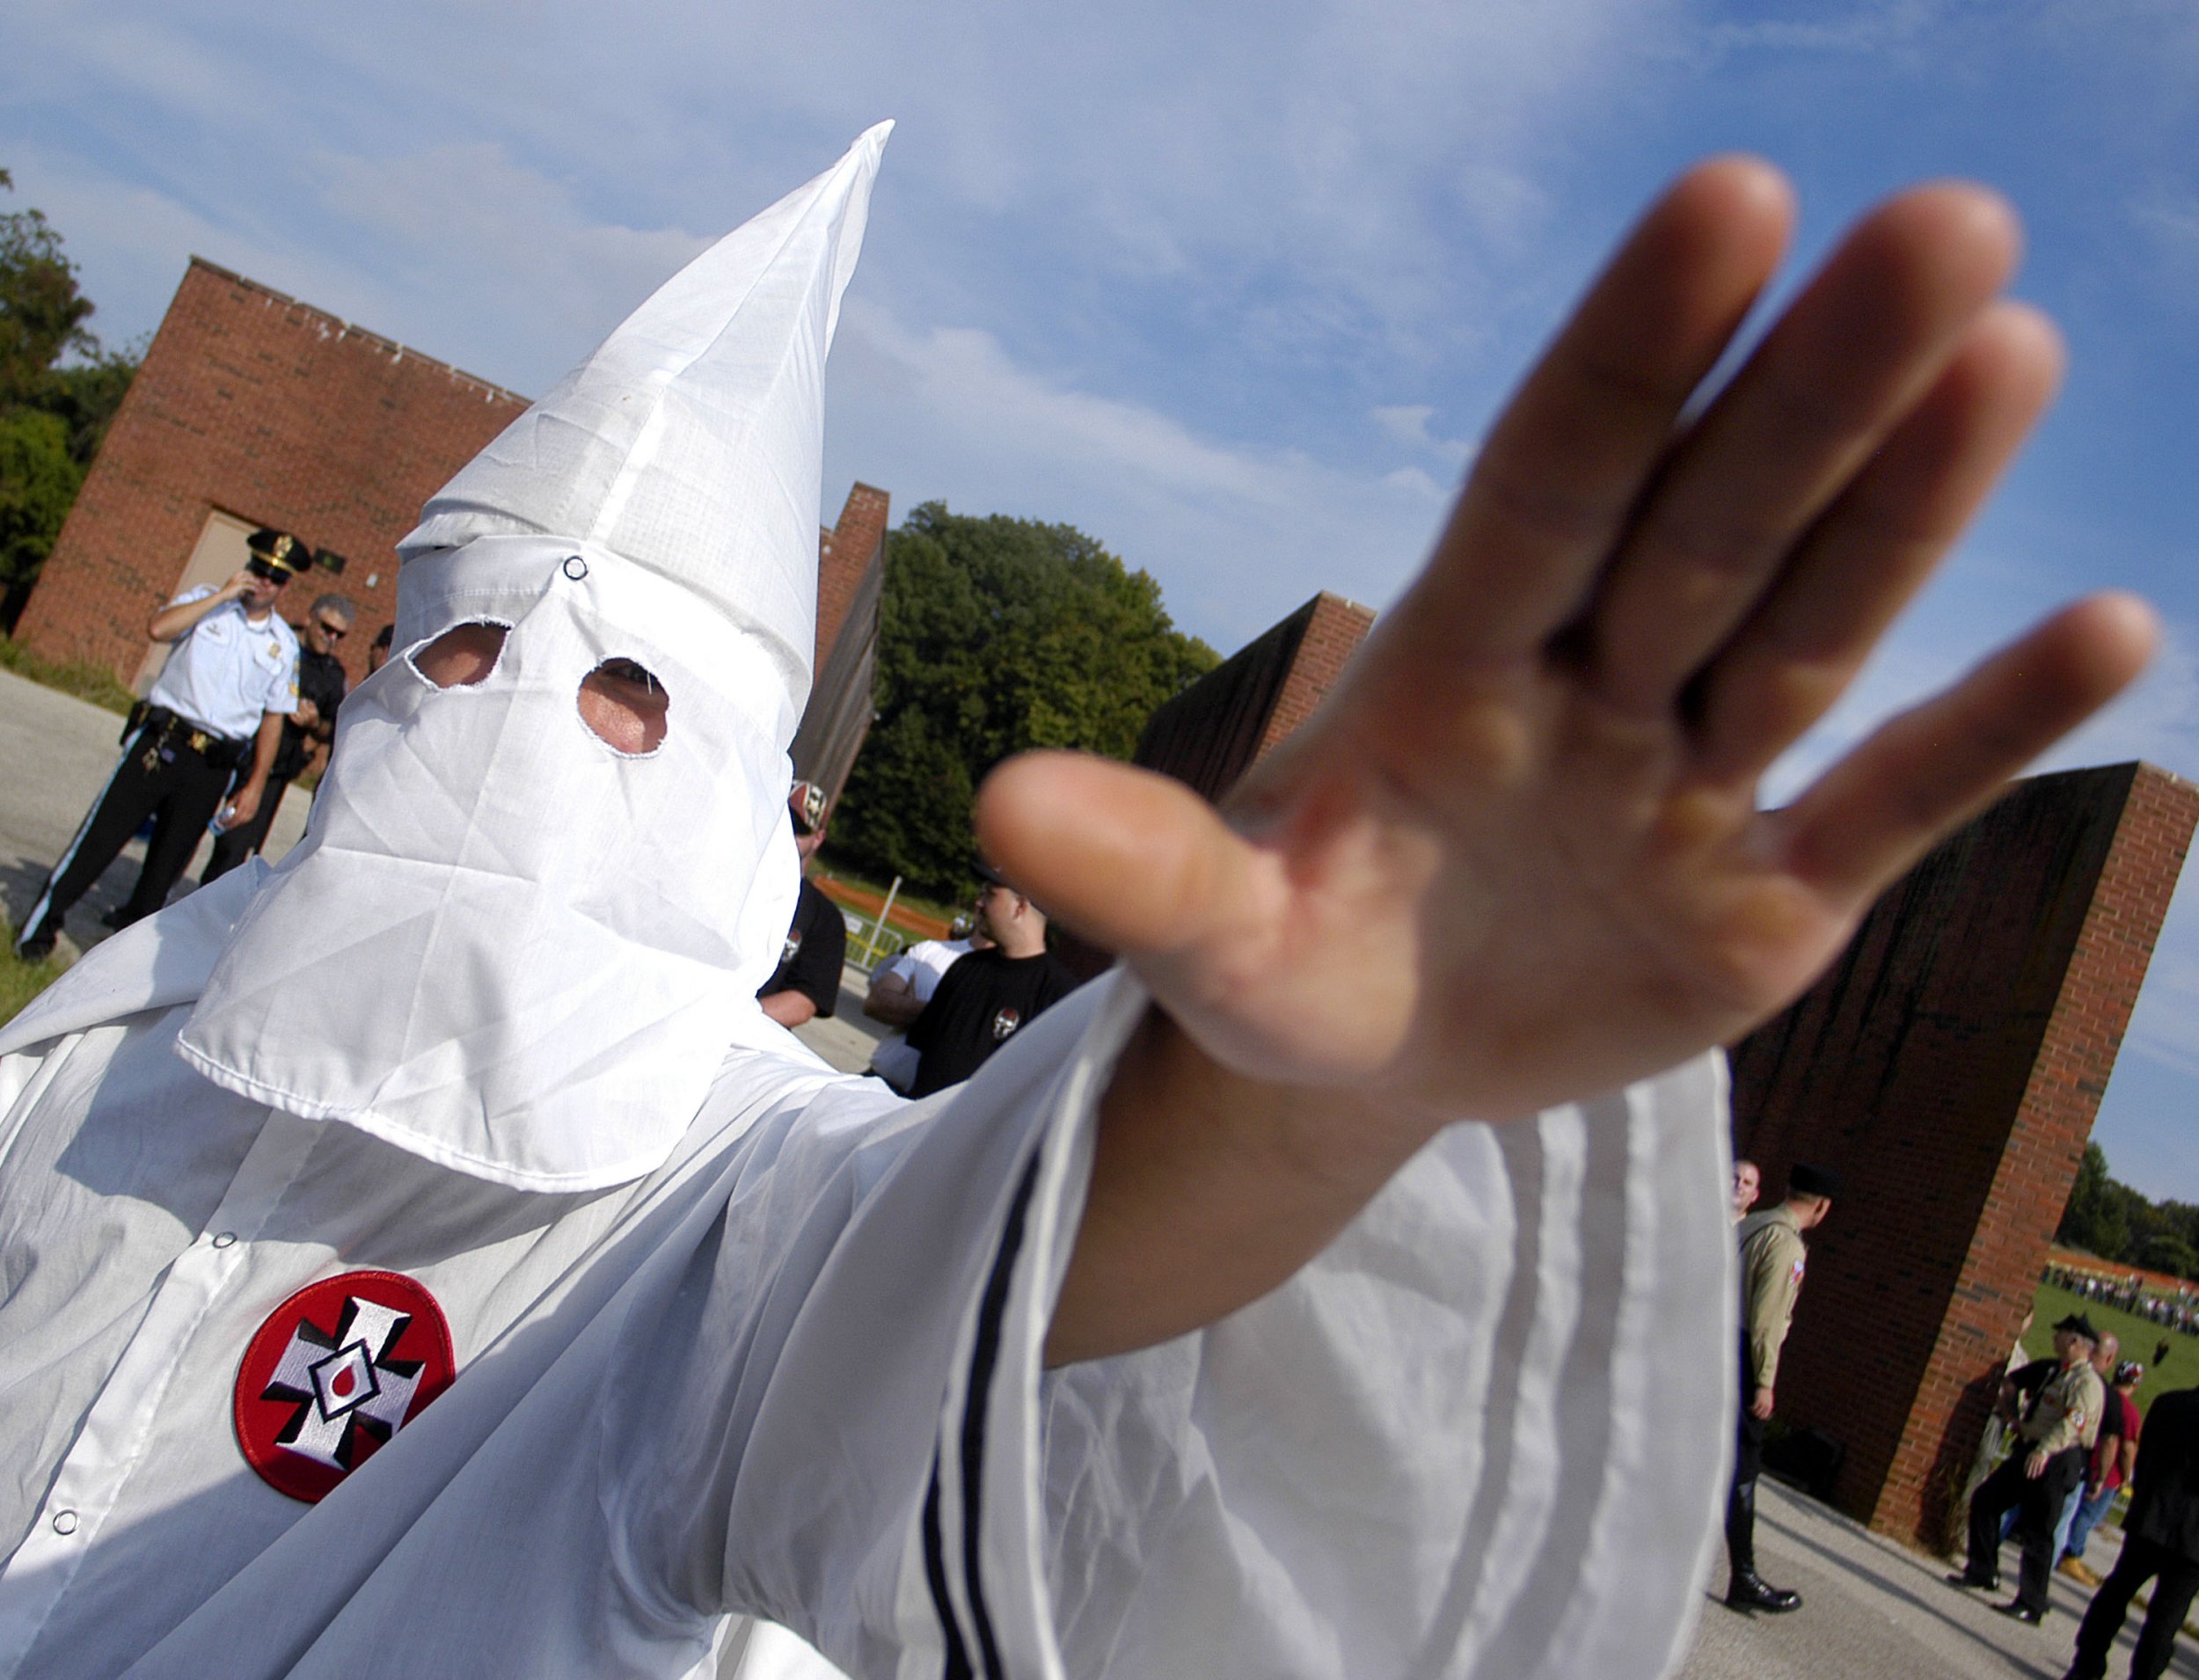 KKK robe sells for $375 at auction Bidding lasts 30 seconds, buyer